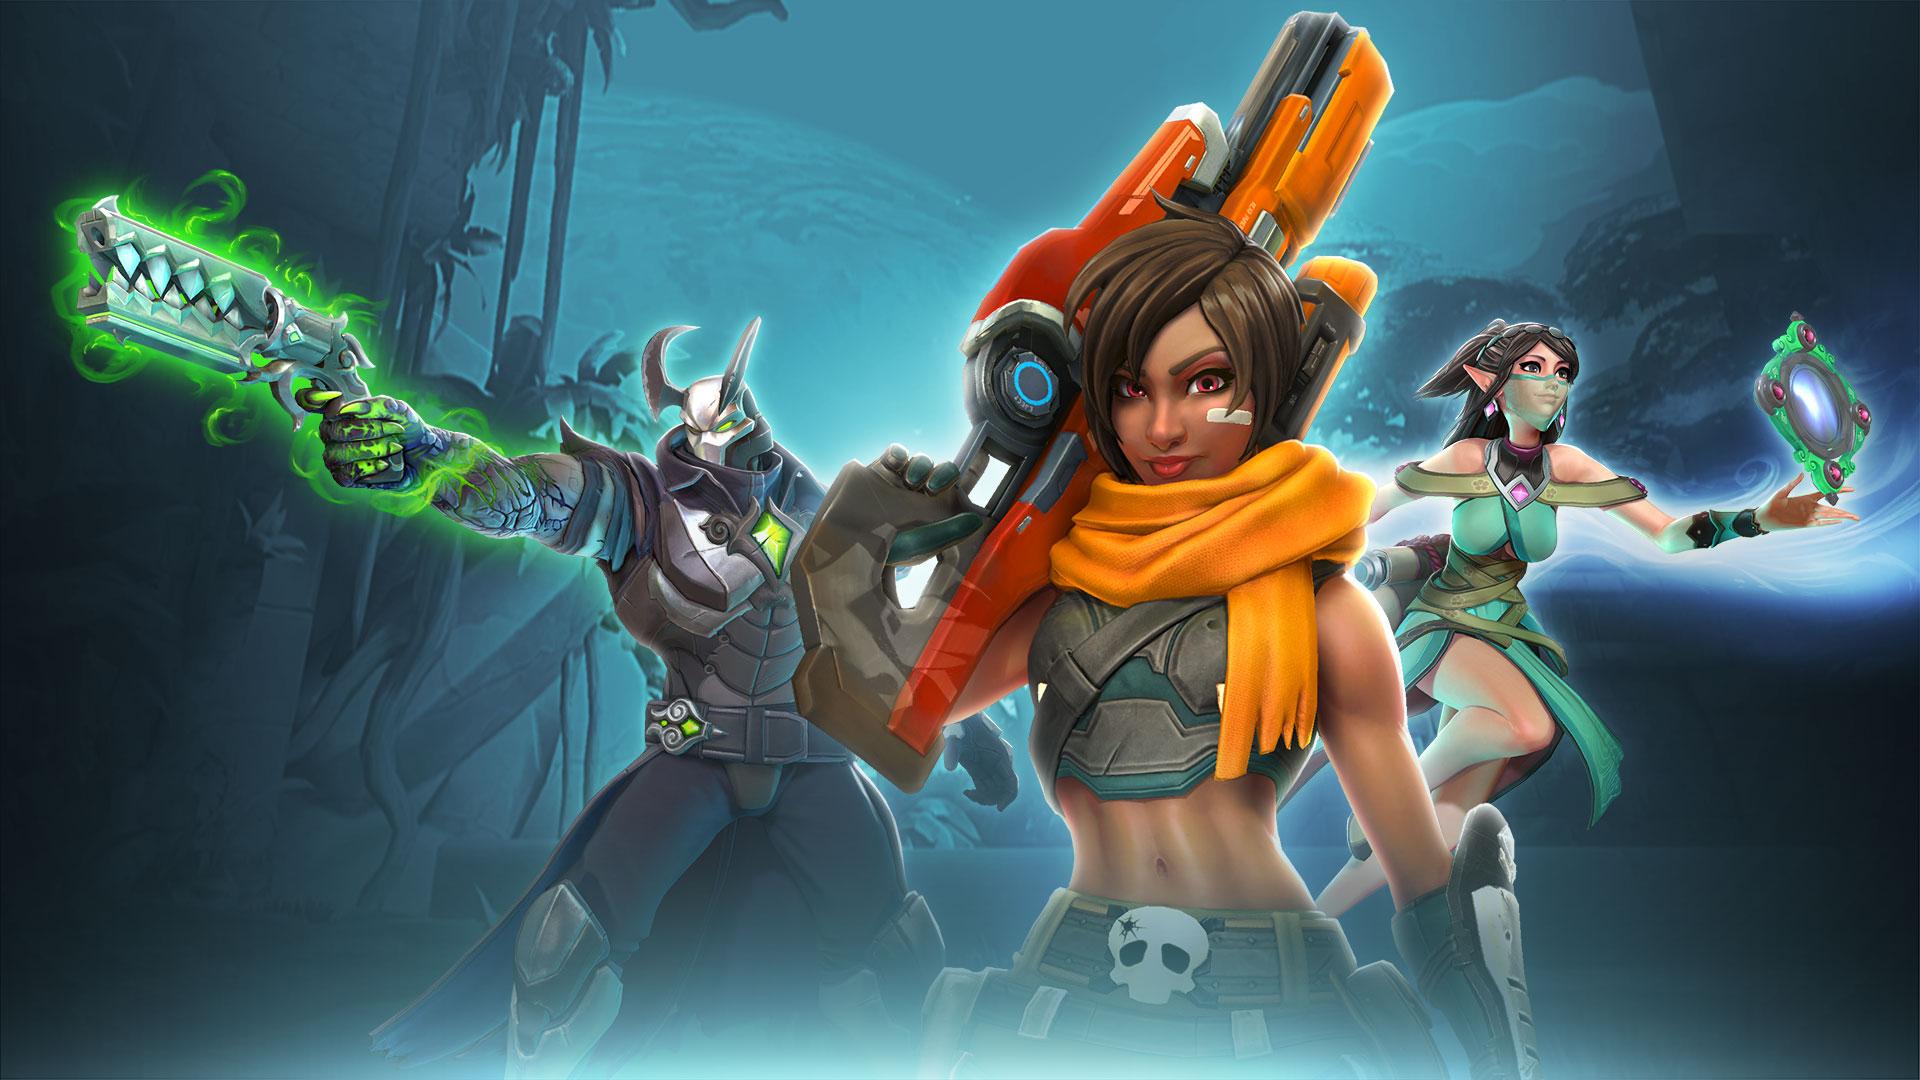 Cross Play Is Coming To Paladins, Realm Royale And Smite